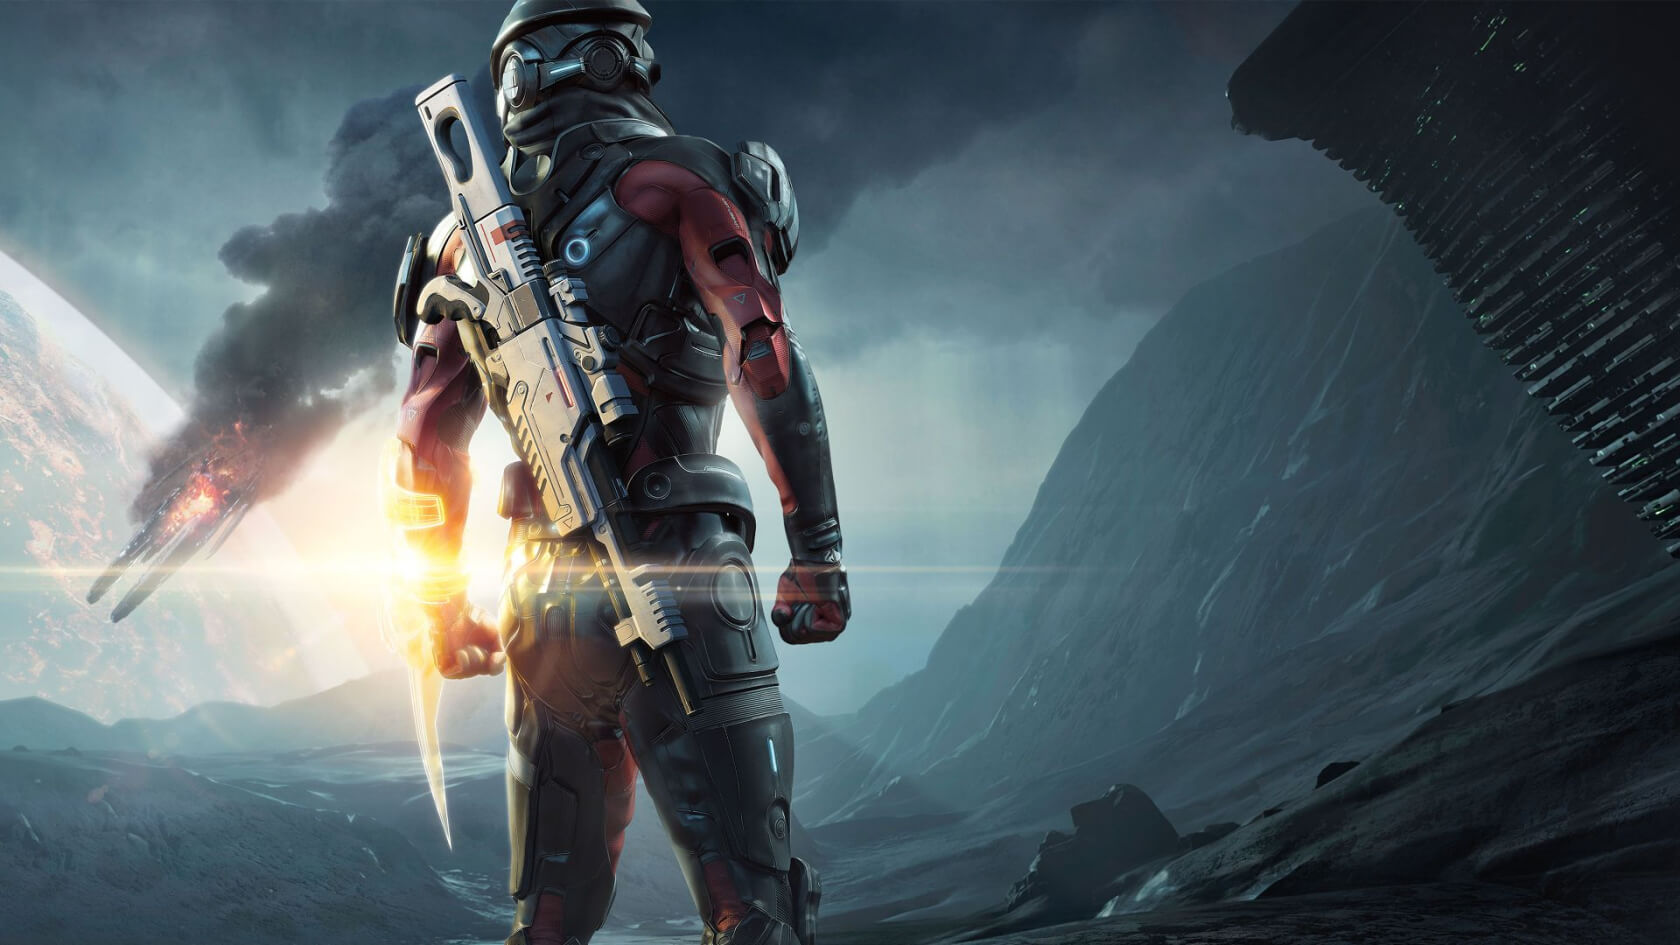 Mass Effect: Andromeda will soon be available on Origin Access